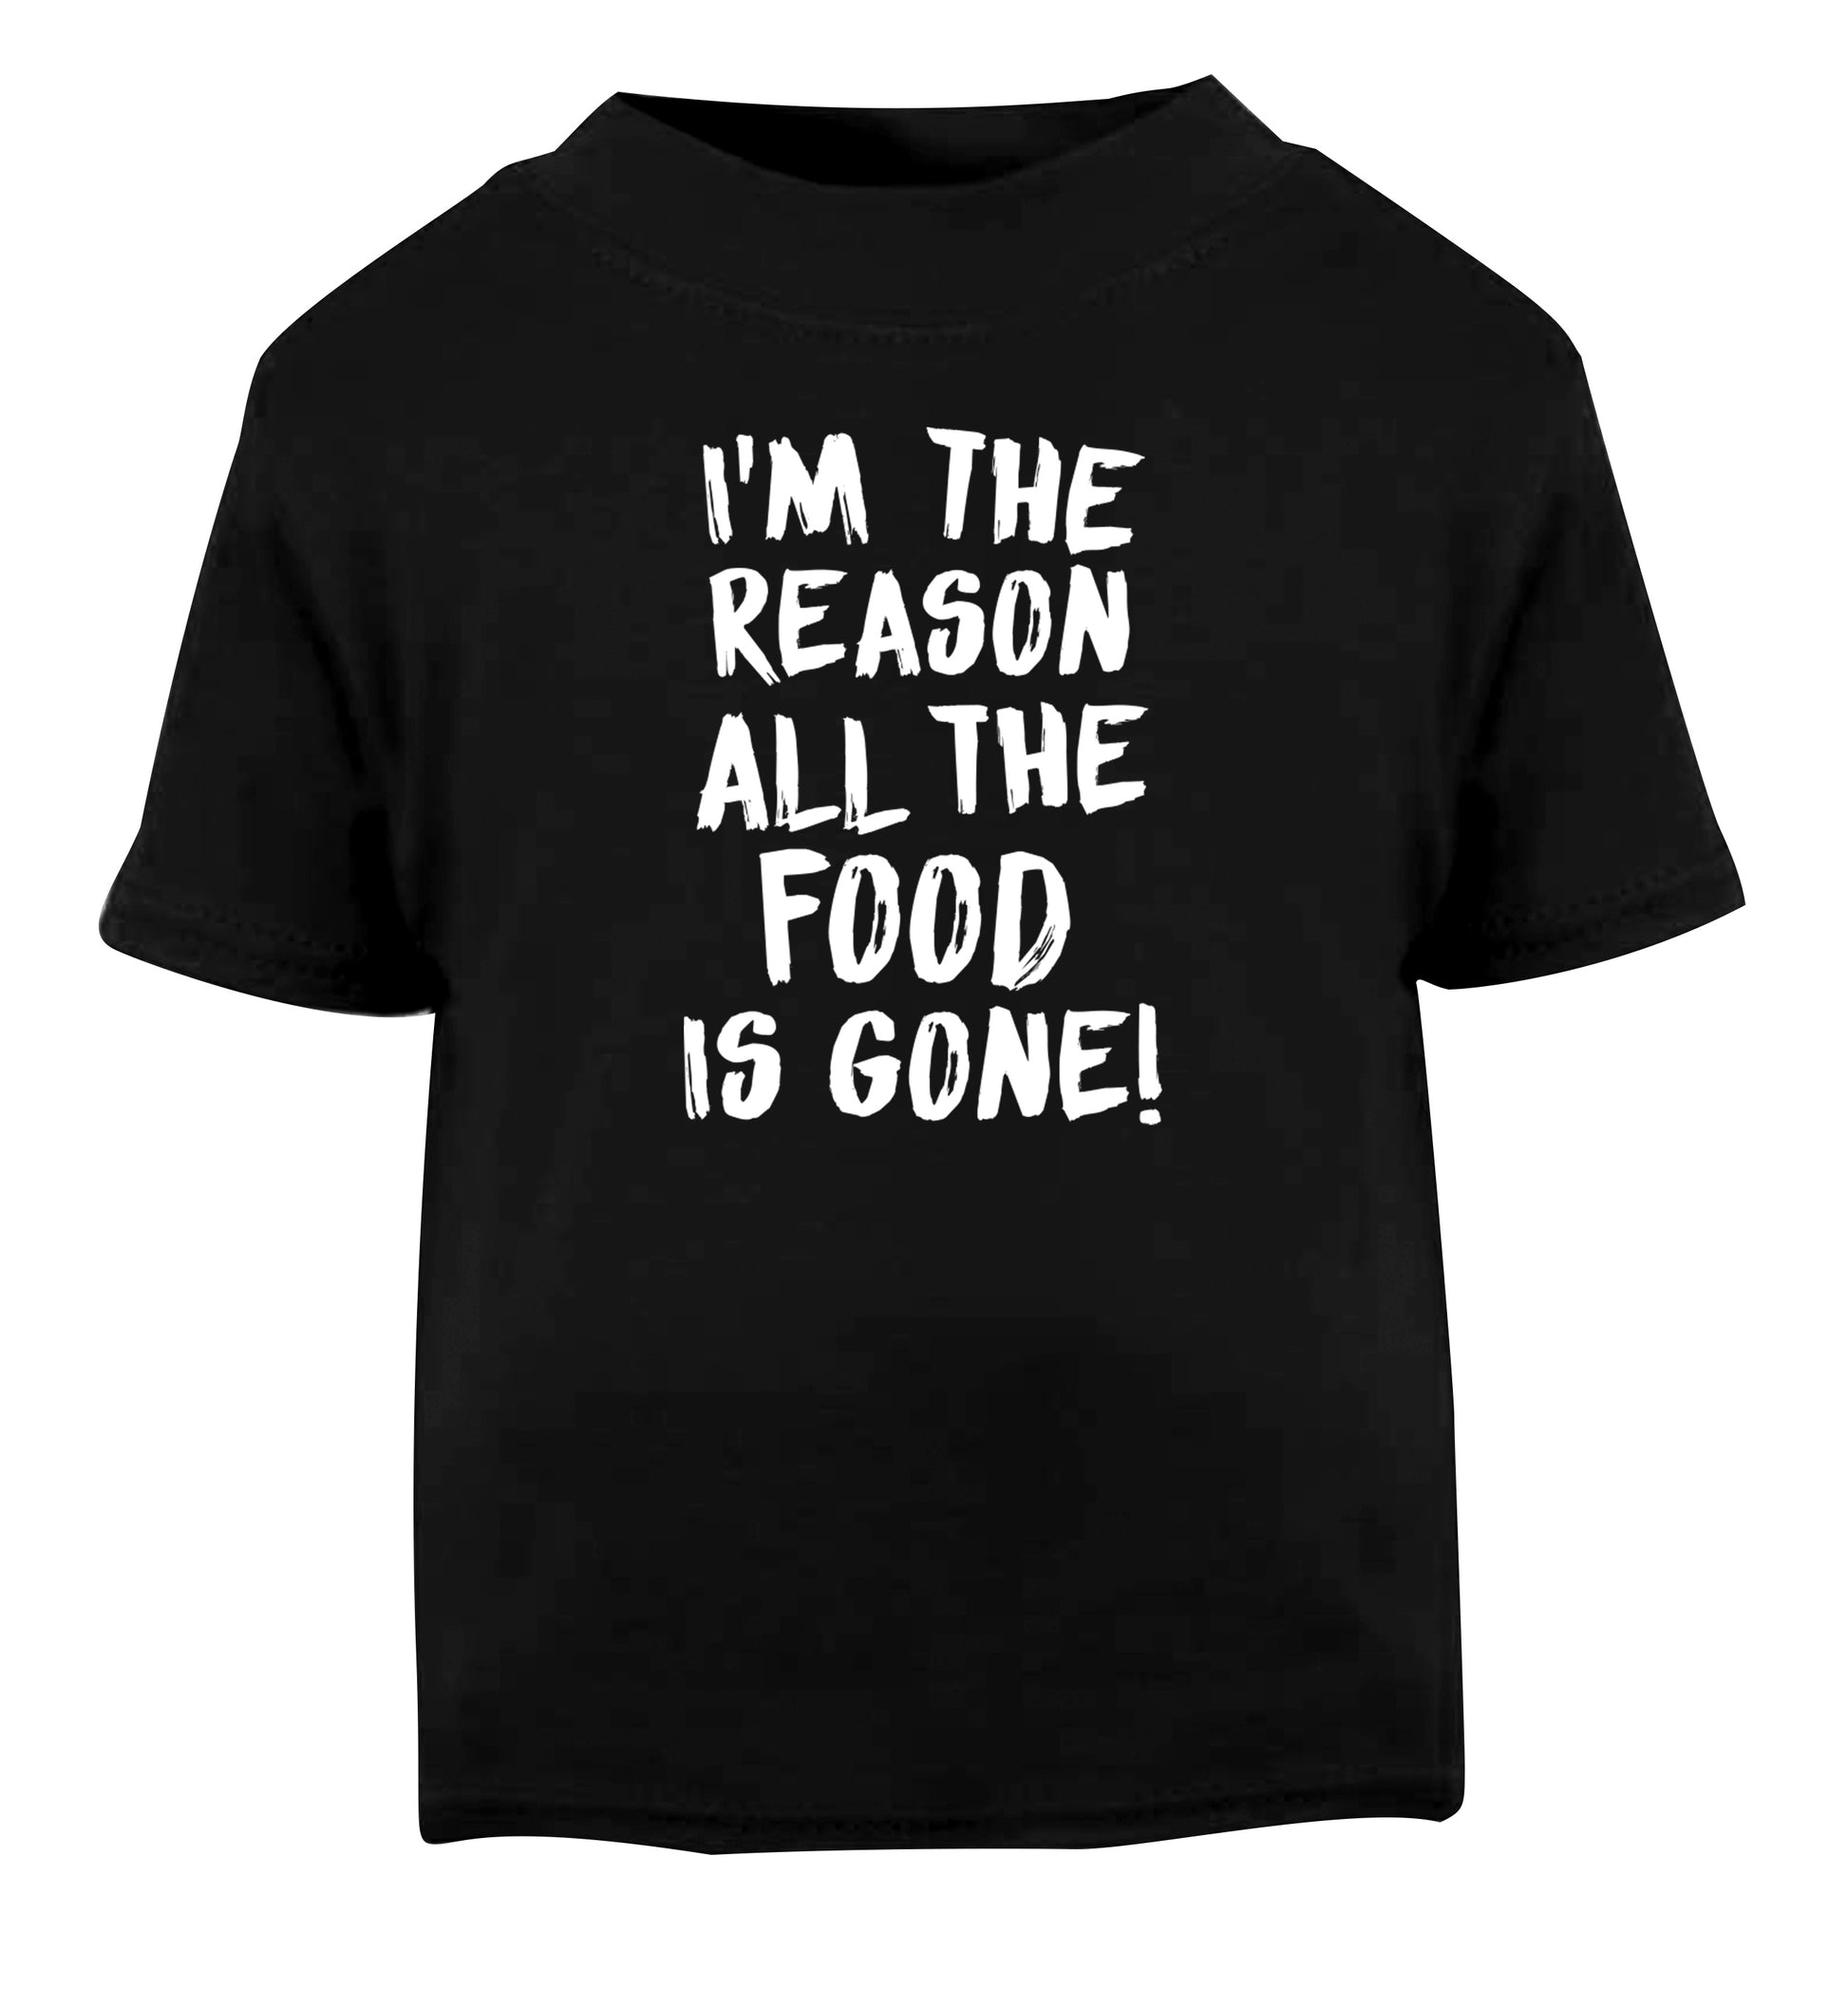 I'm the reason why all the food is gone Black Baby Toddler Tshirt 2 years